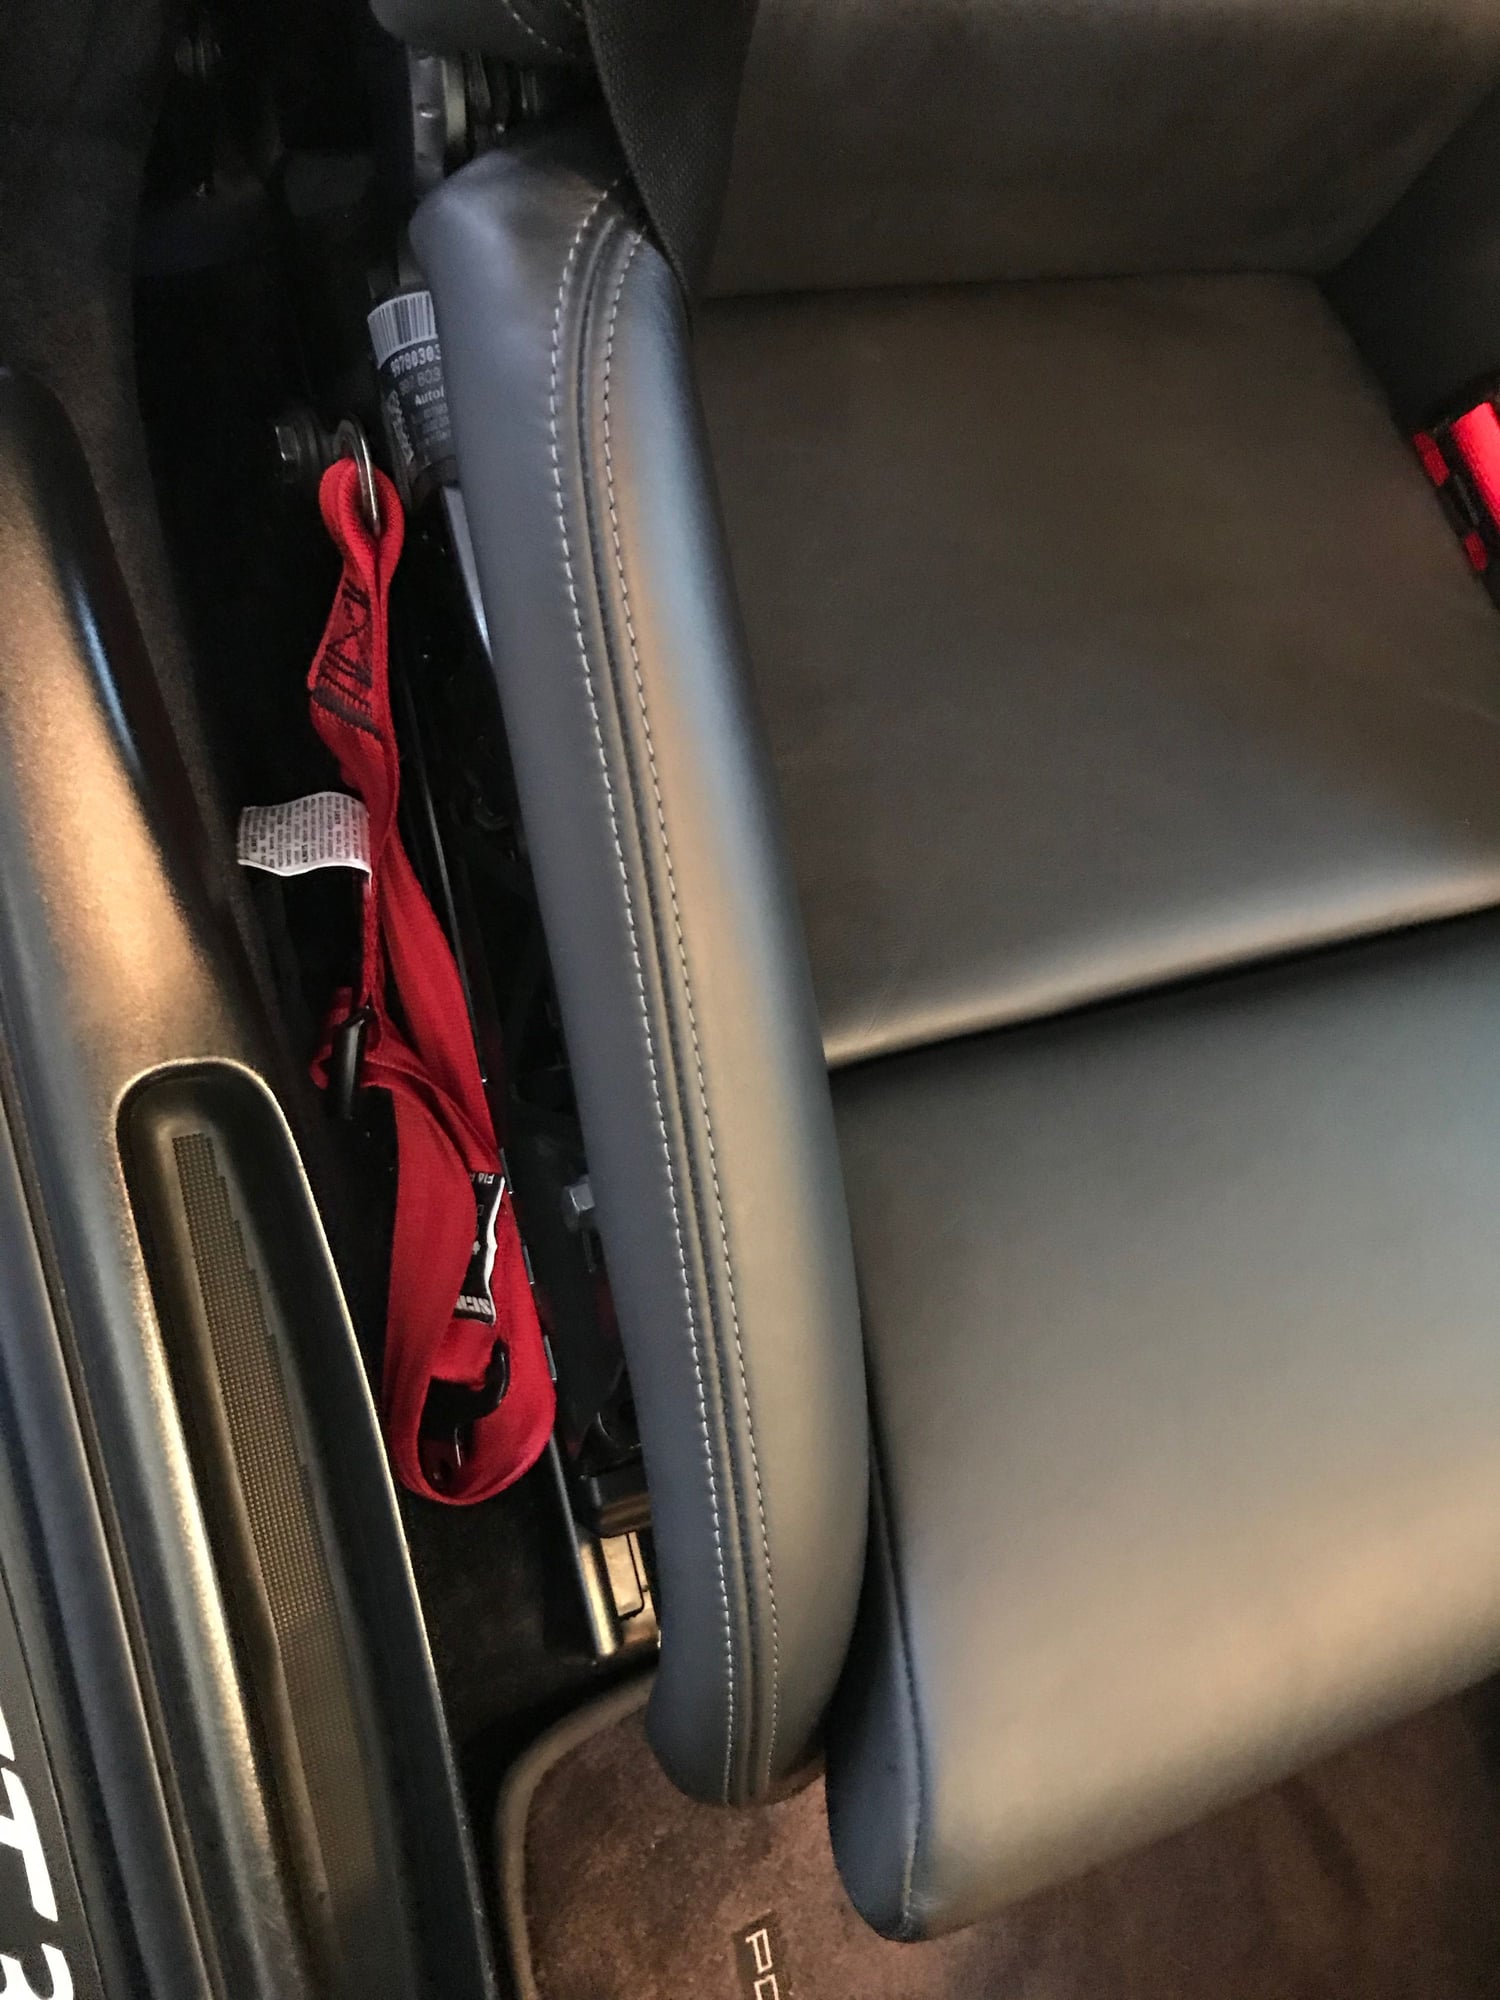 Interior/Upholstery - 997 GT2 carbon fiber folding bucket seats - Used - 2005 to 2013 Porsche 911 - Minneapolis, MN 55426, United States